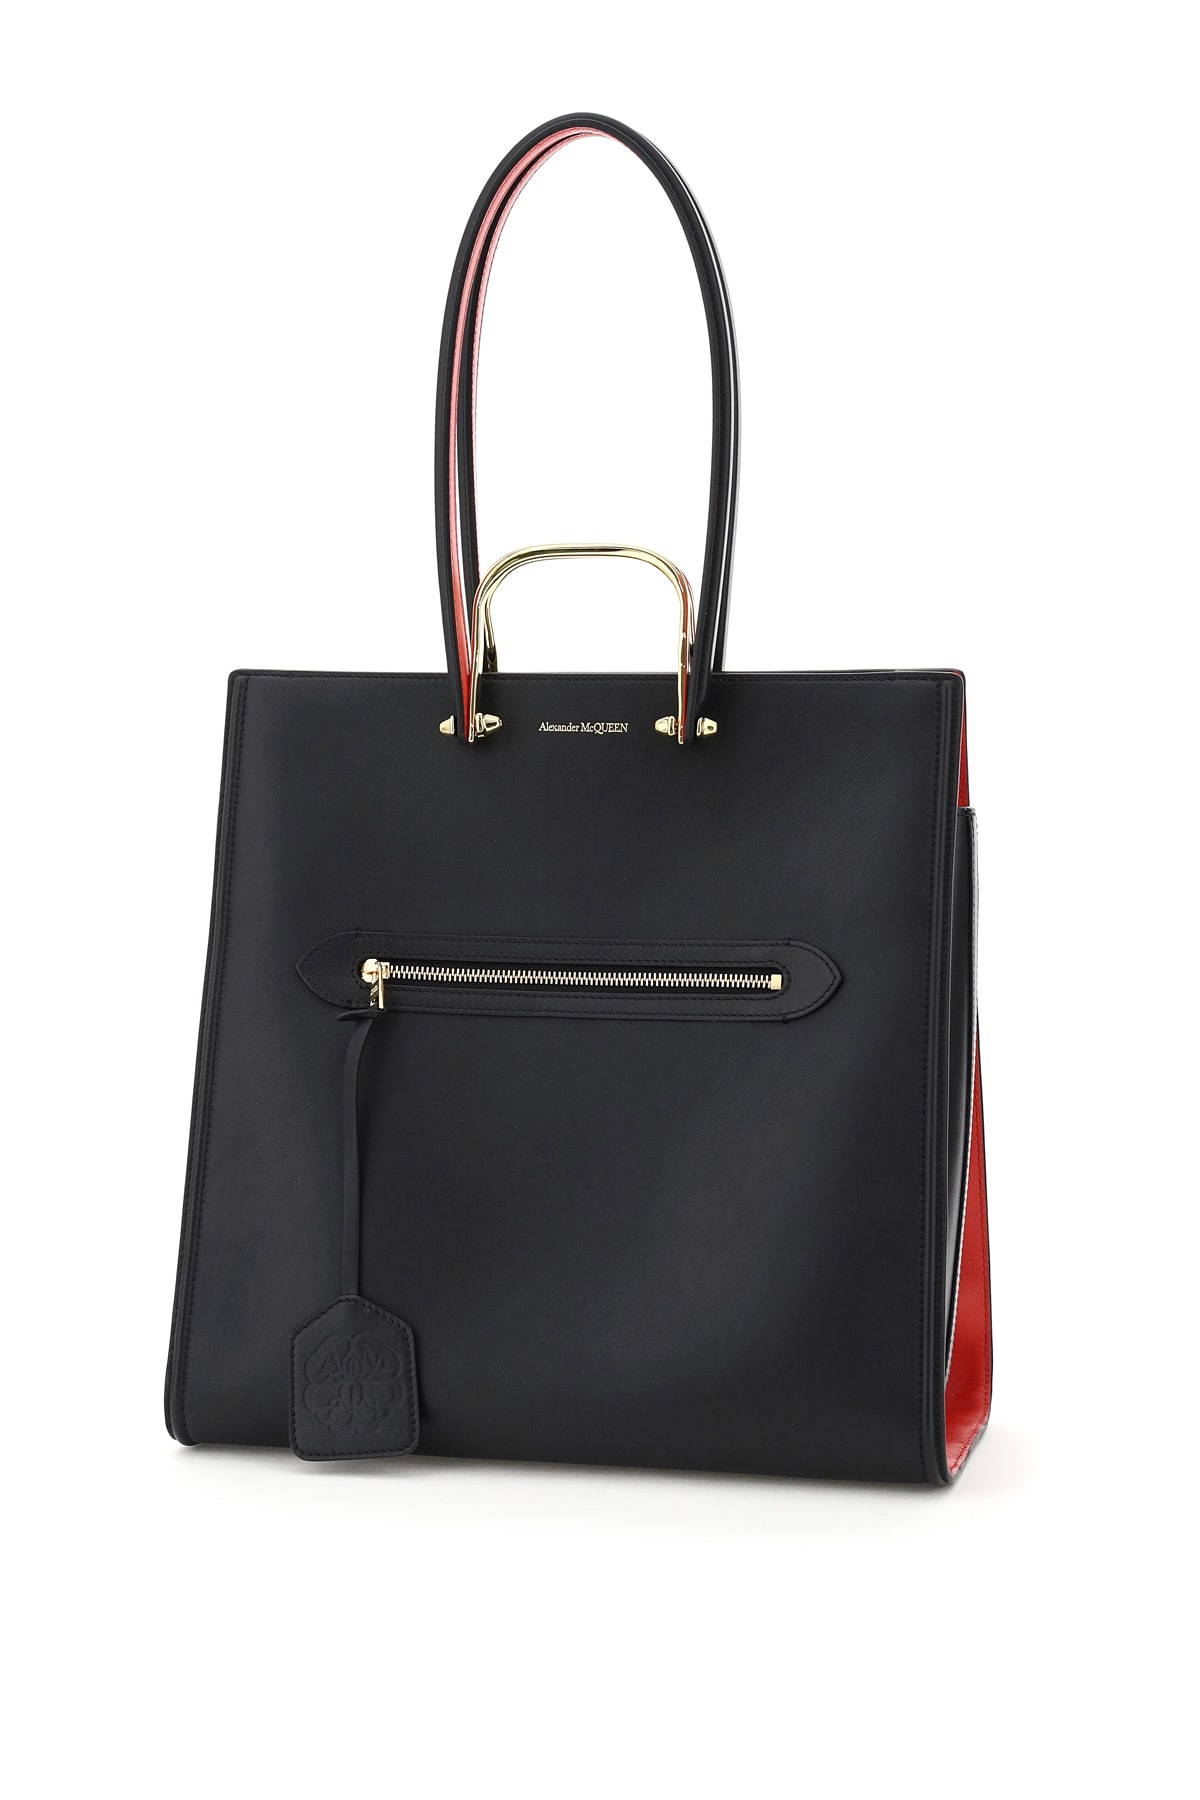 Alexander McQueen The Tall Story Tote Bag